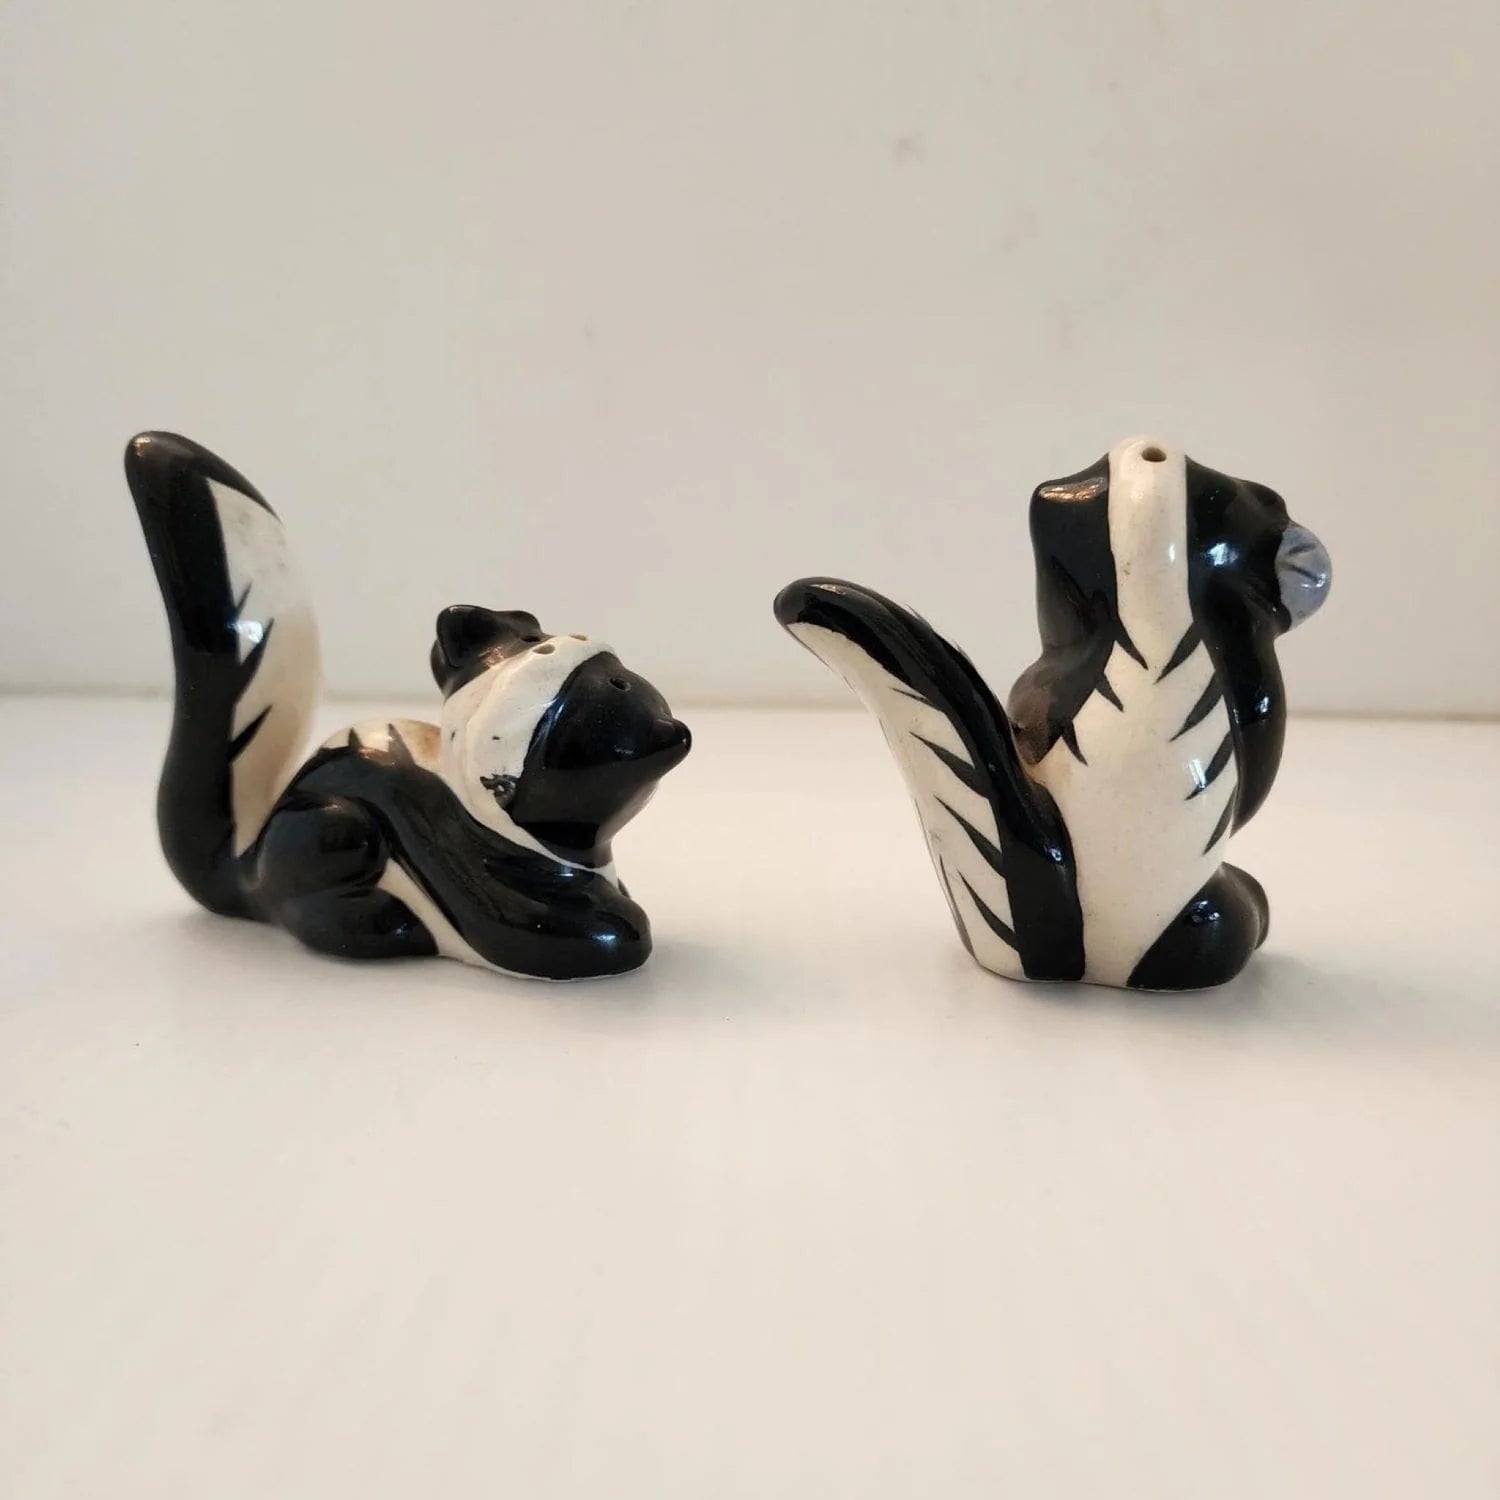 Two ceramic animals, one black and one white, sitting on a table.